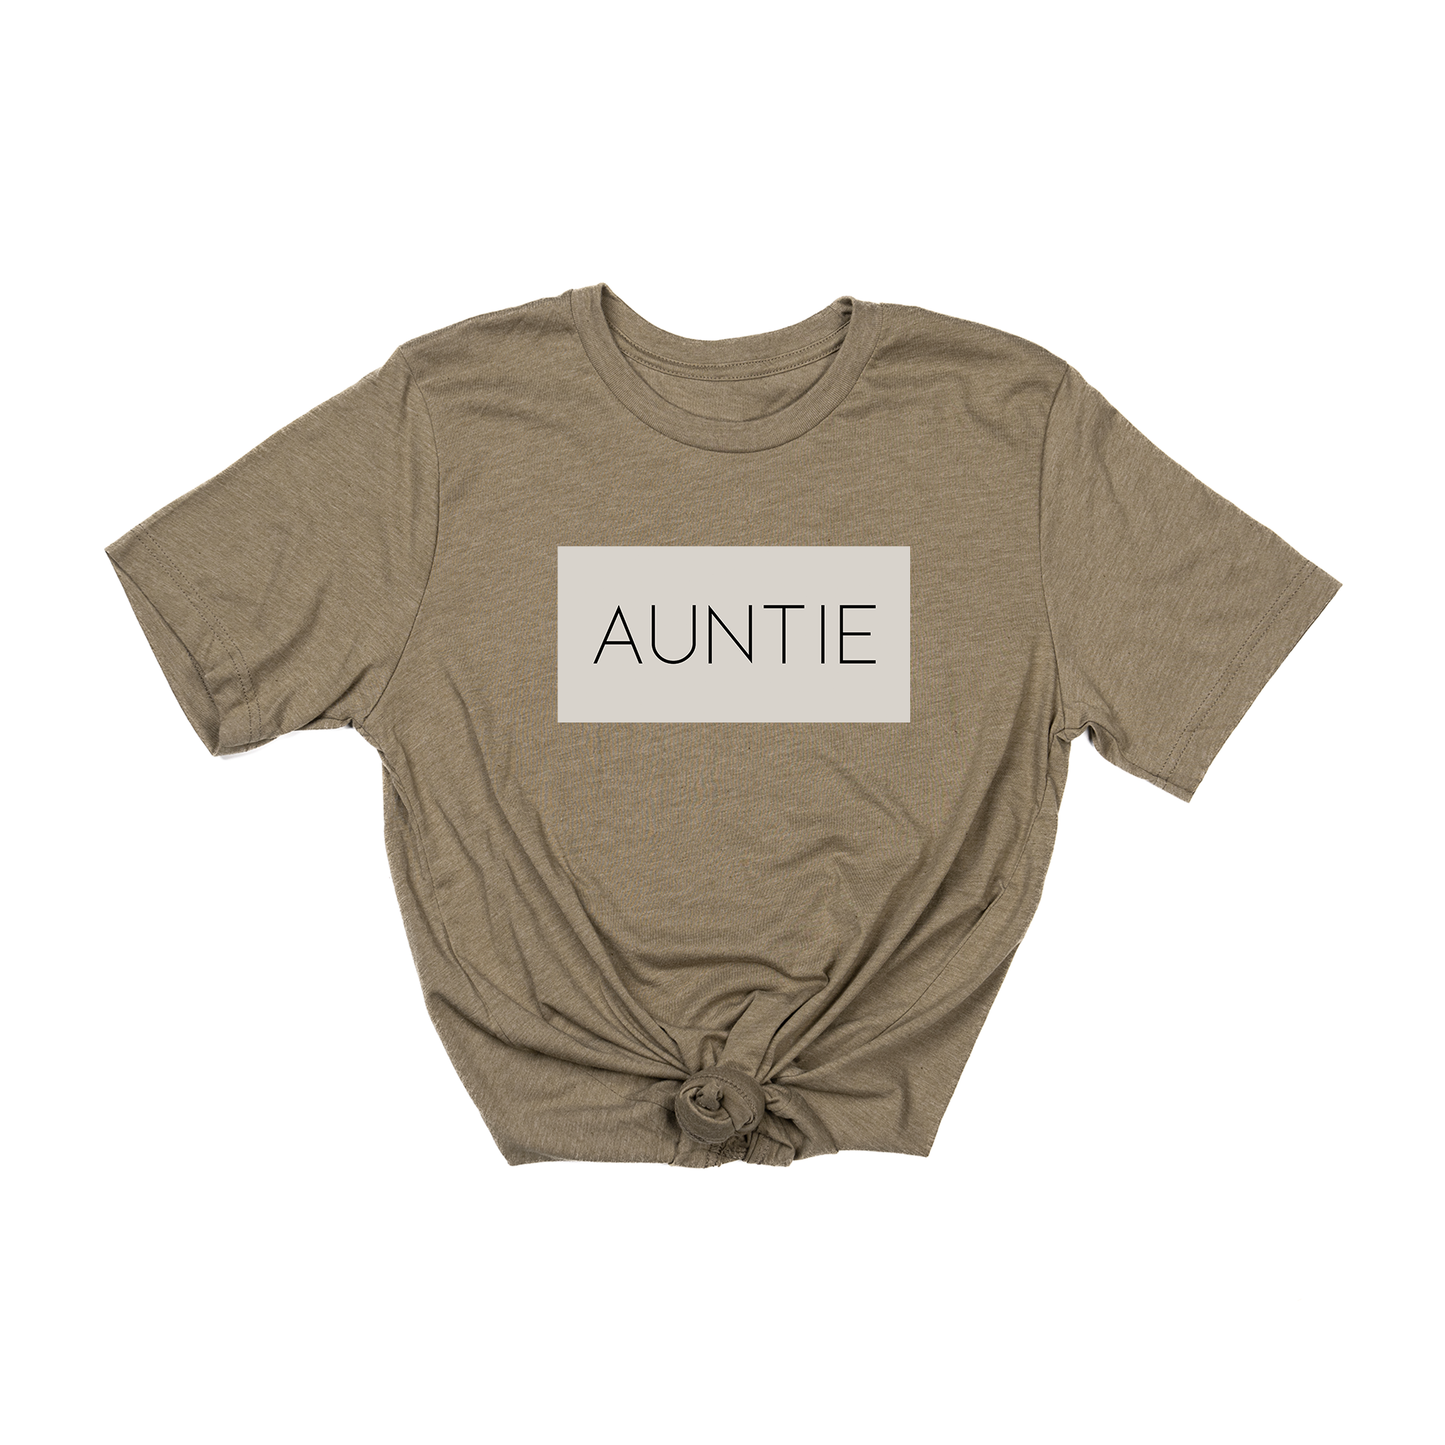 Auntie (Boxed Collection, Stone Box/Black Text, Across Front) - Tee (Olive)